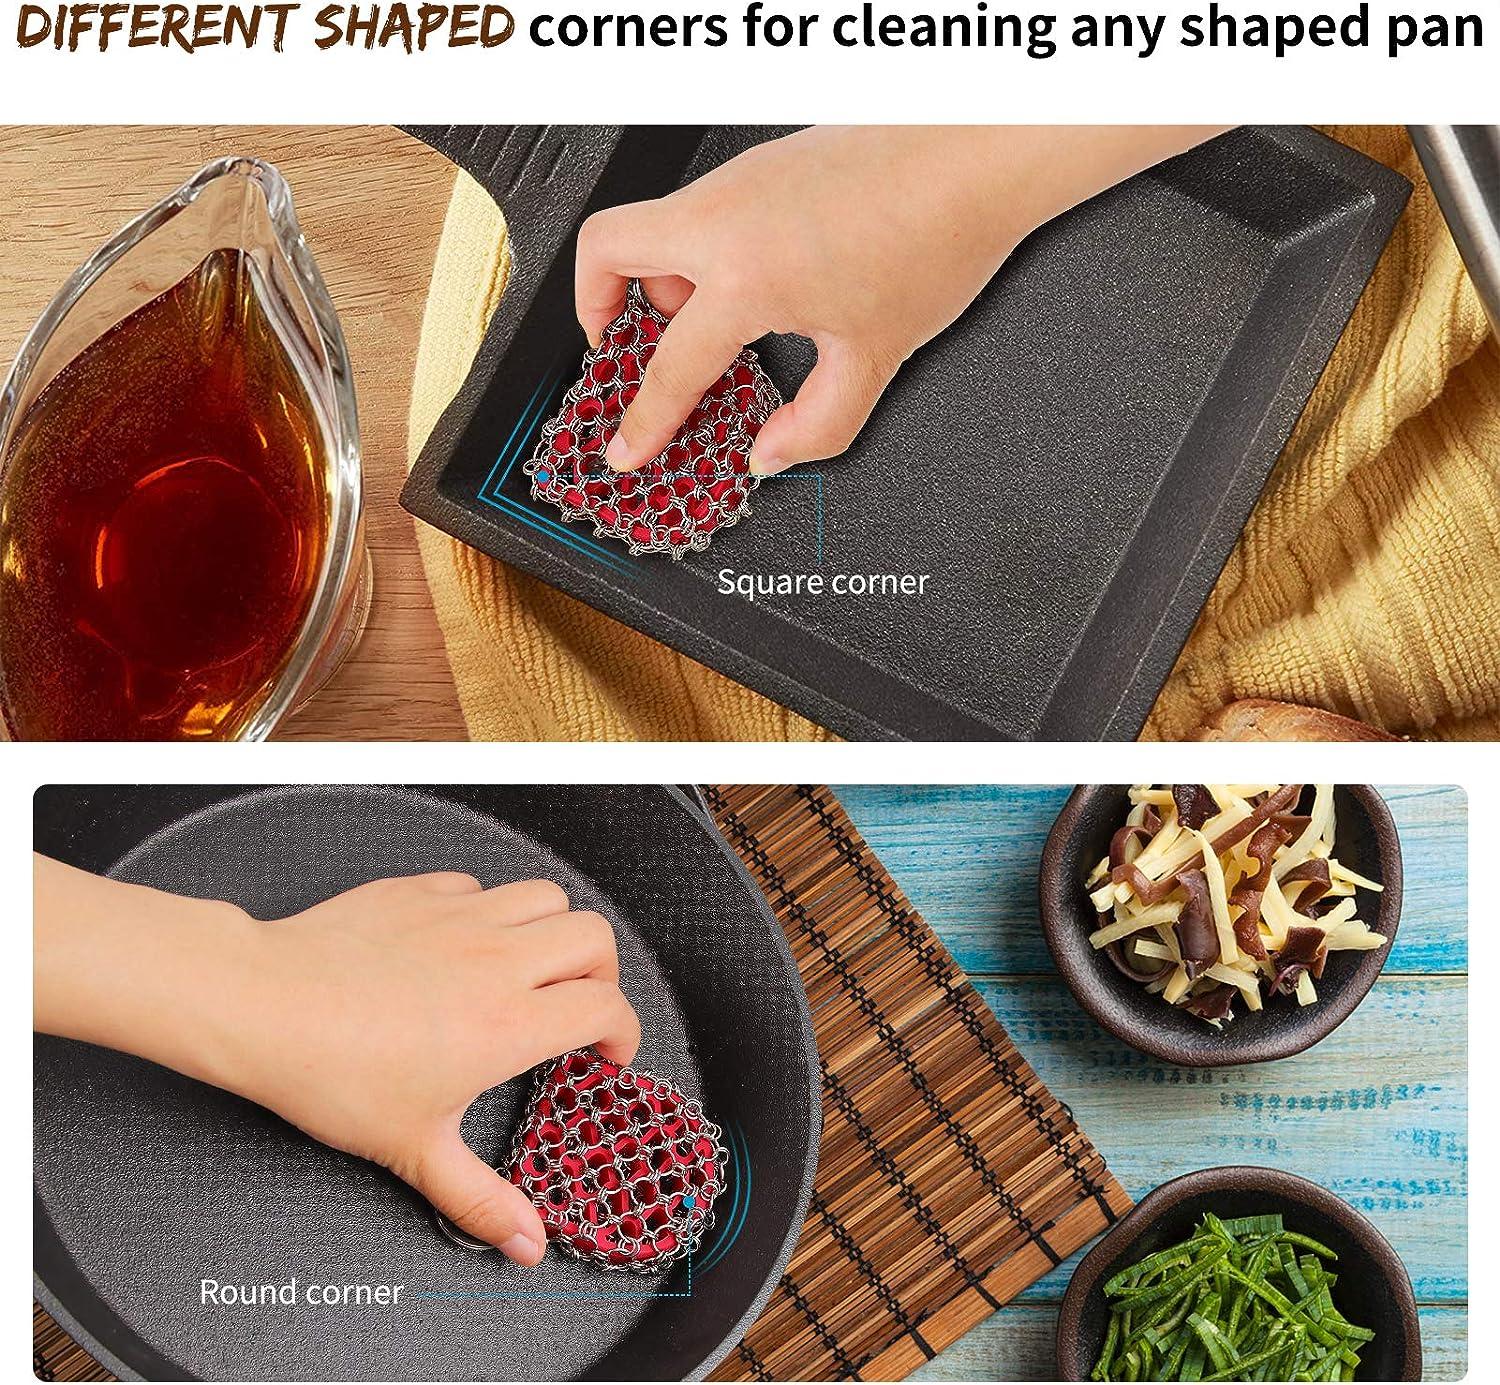  Cast Iron Scrubber with Long Handle  316 Cast Iron Cleaner  Chainmail Scrubber for Cast Iron Pan Skillet Cleaner - Dish Scouring Pad  Dishwasher Safe Cleaning Kit (Grey, 1 Scrubber +